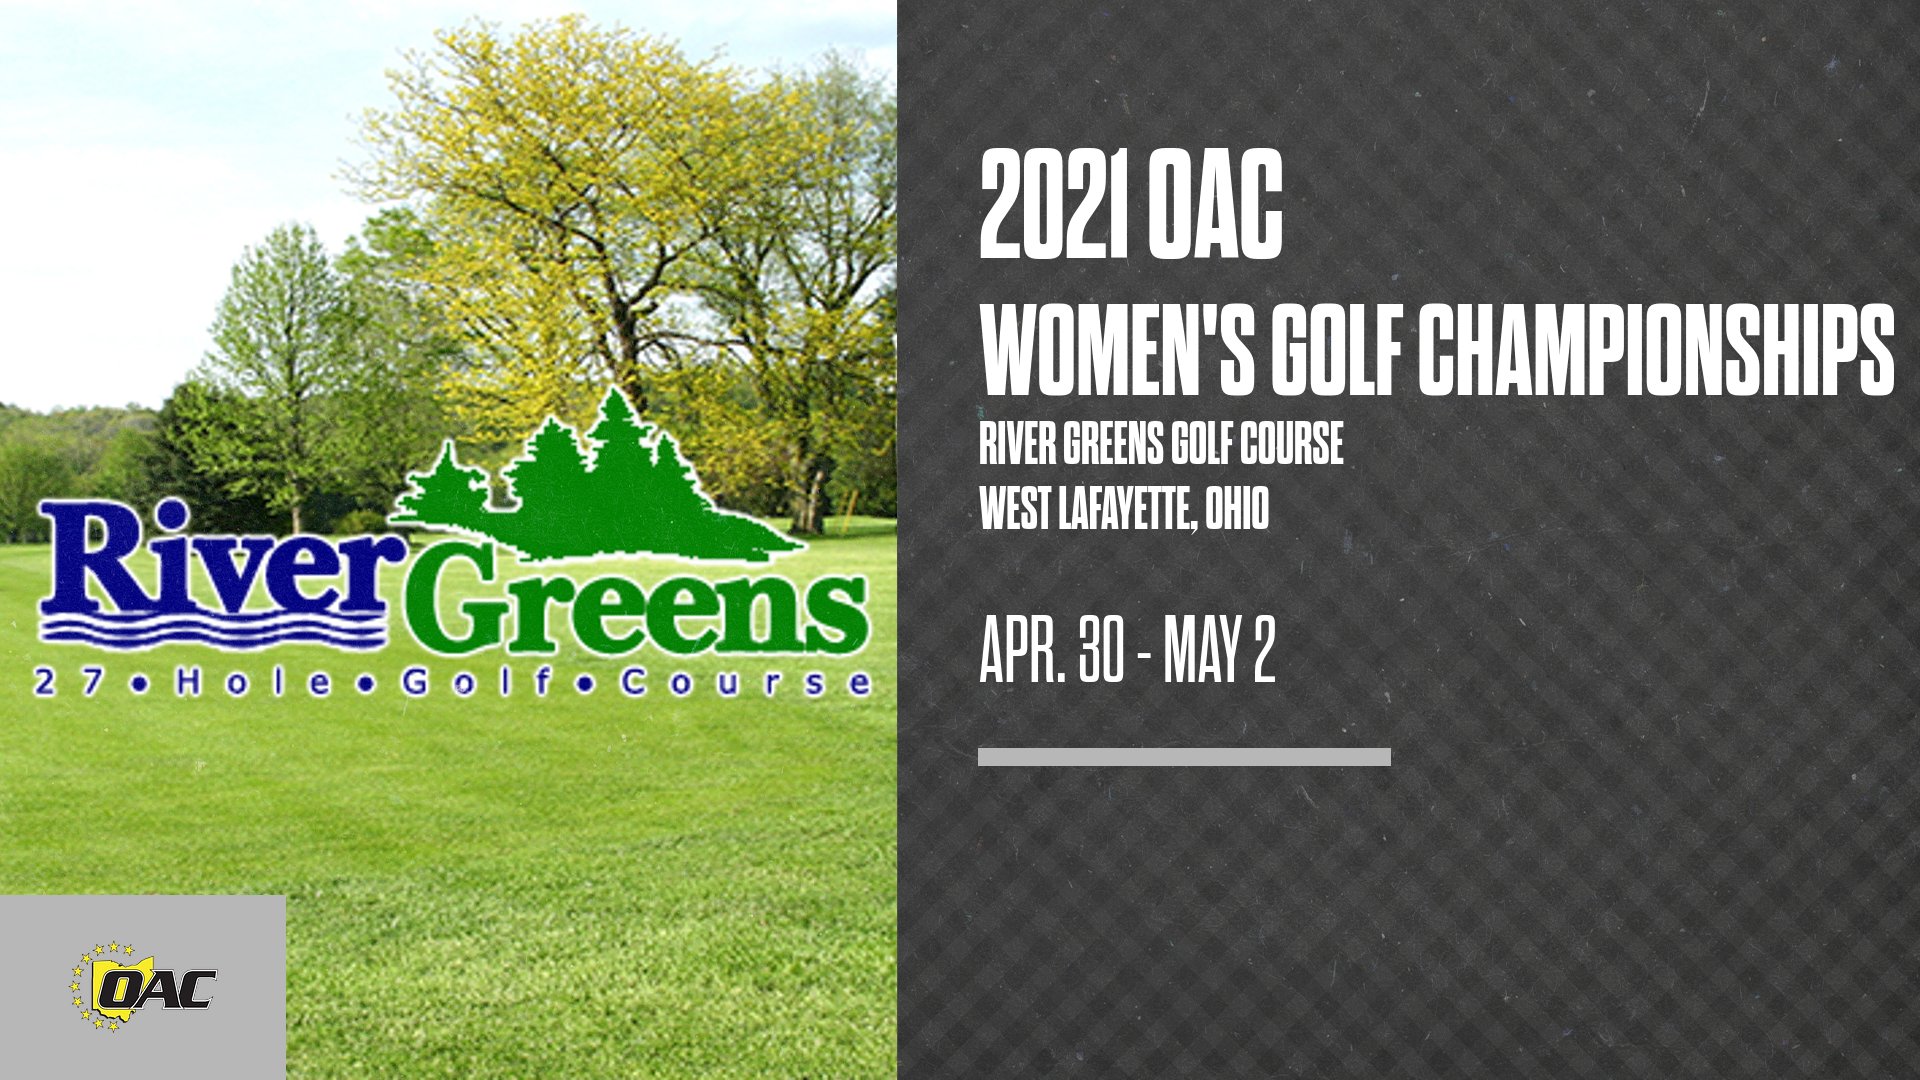 Mount Union to Host 2021 OAC Women's Golf Tournament April 30 - May 2